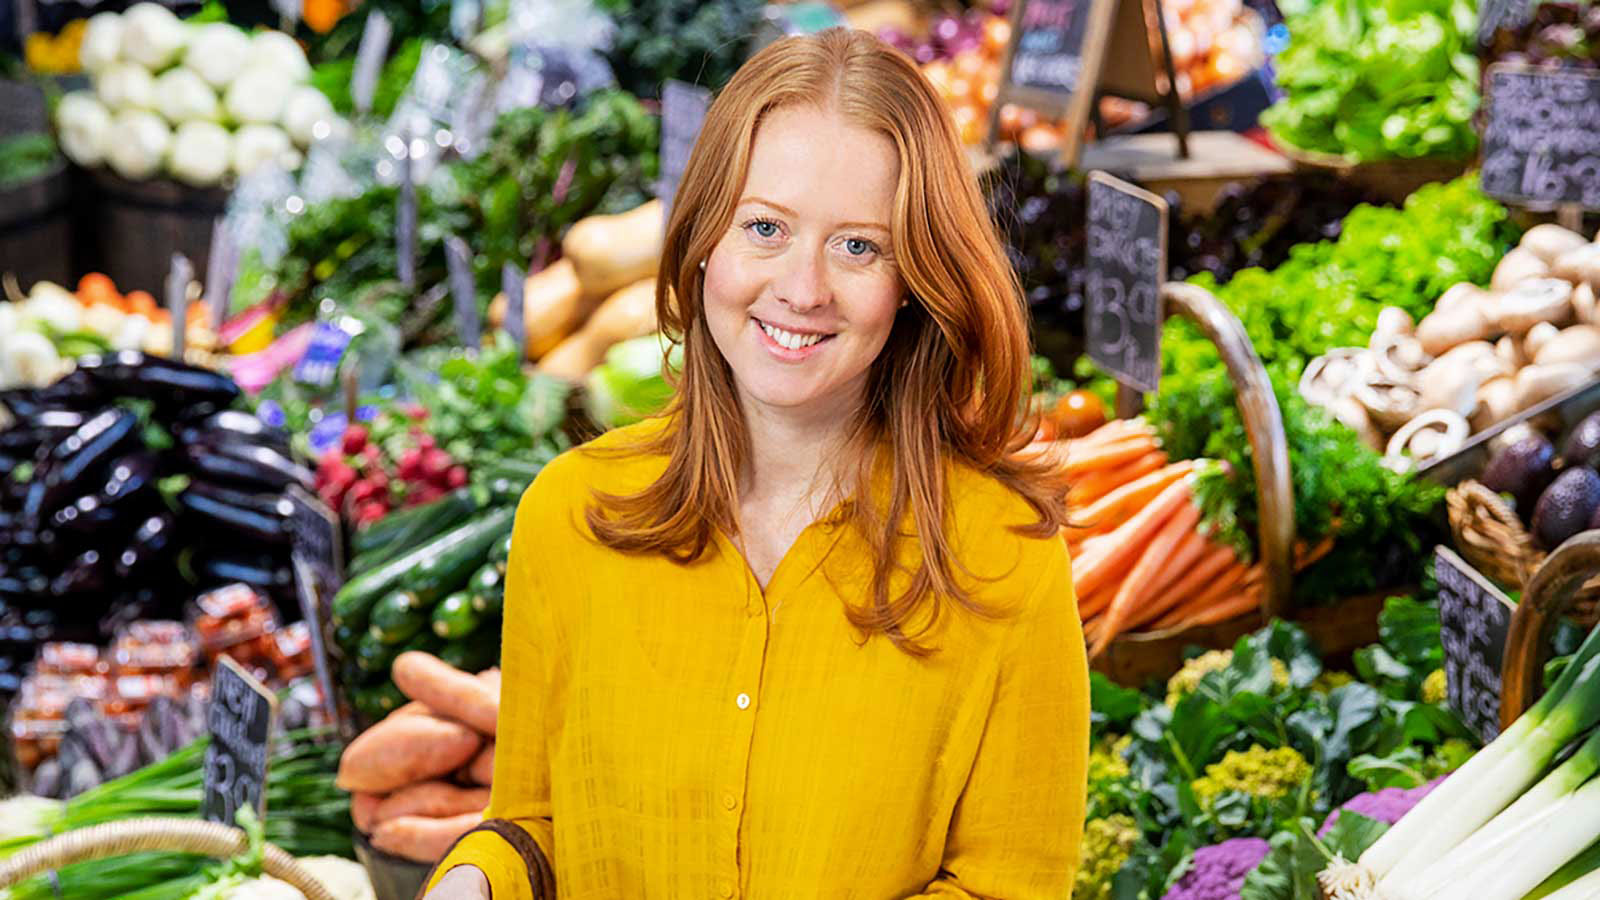 A woman with red hair and a yellow top is standing in front of a fresh produce display